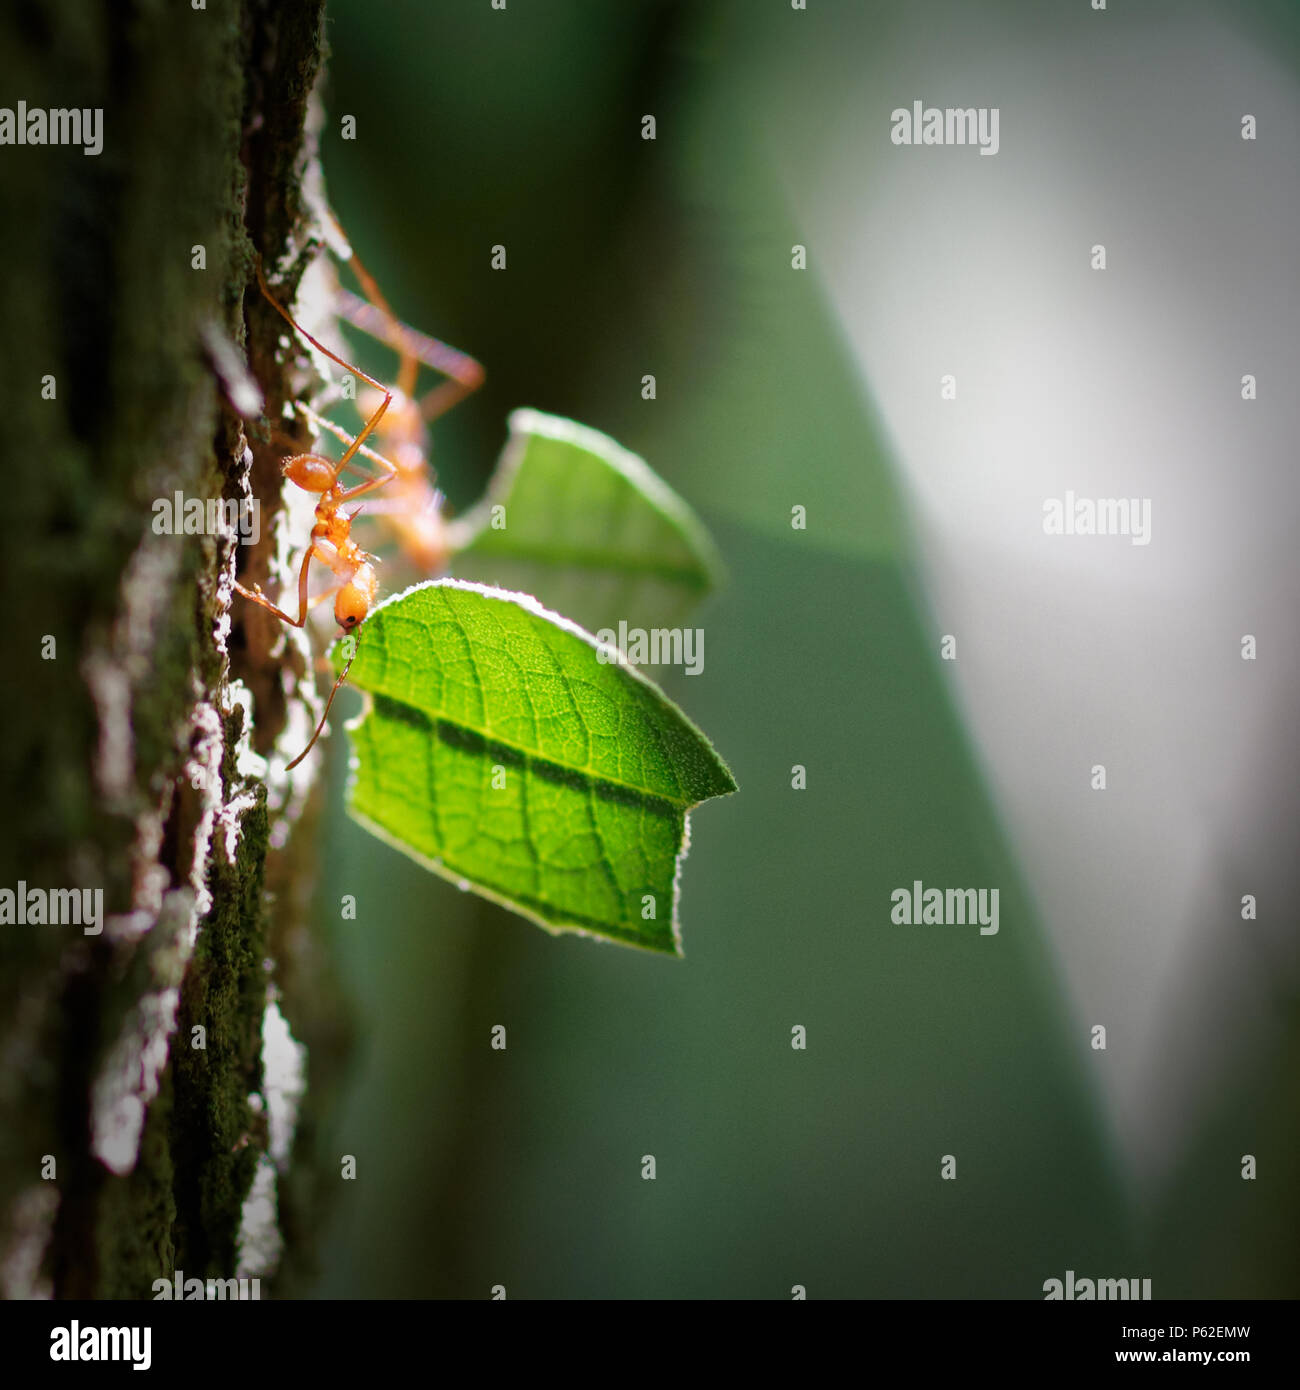 Cooperation, team play, team spirit, team work, addiction, hard-work, agility are the perfect nouns for Leafcutter ants workers (Atta cephalotes). Stock Photo